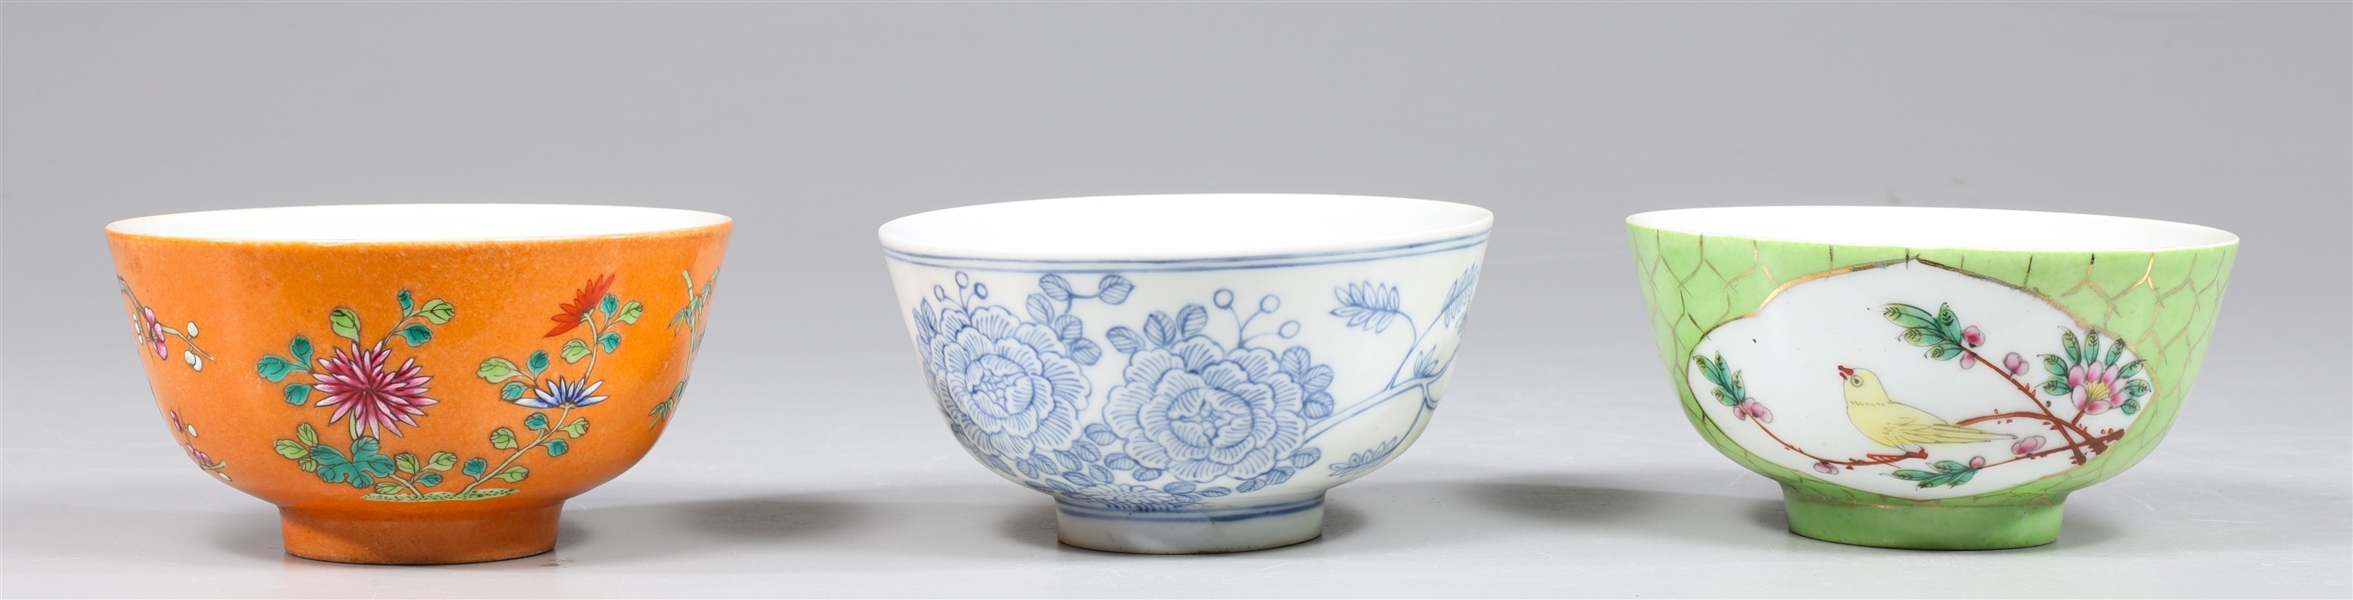 Group of three Chinese porcelain